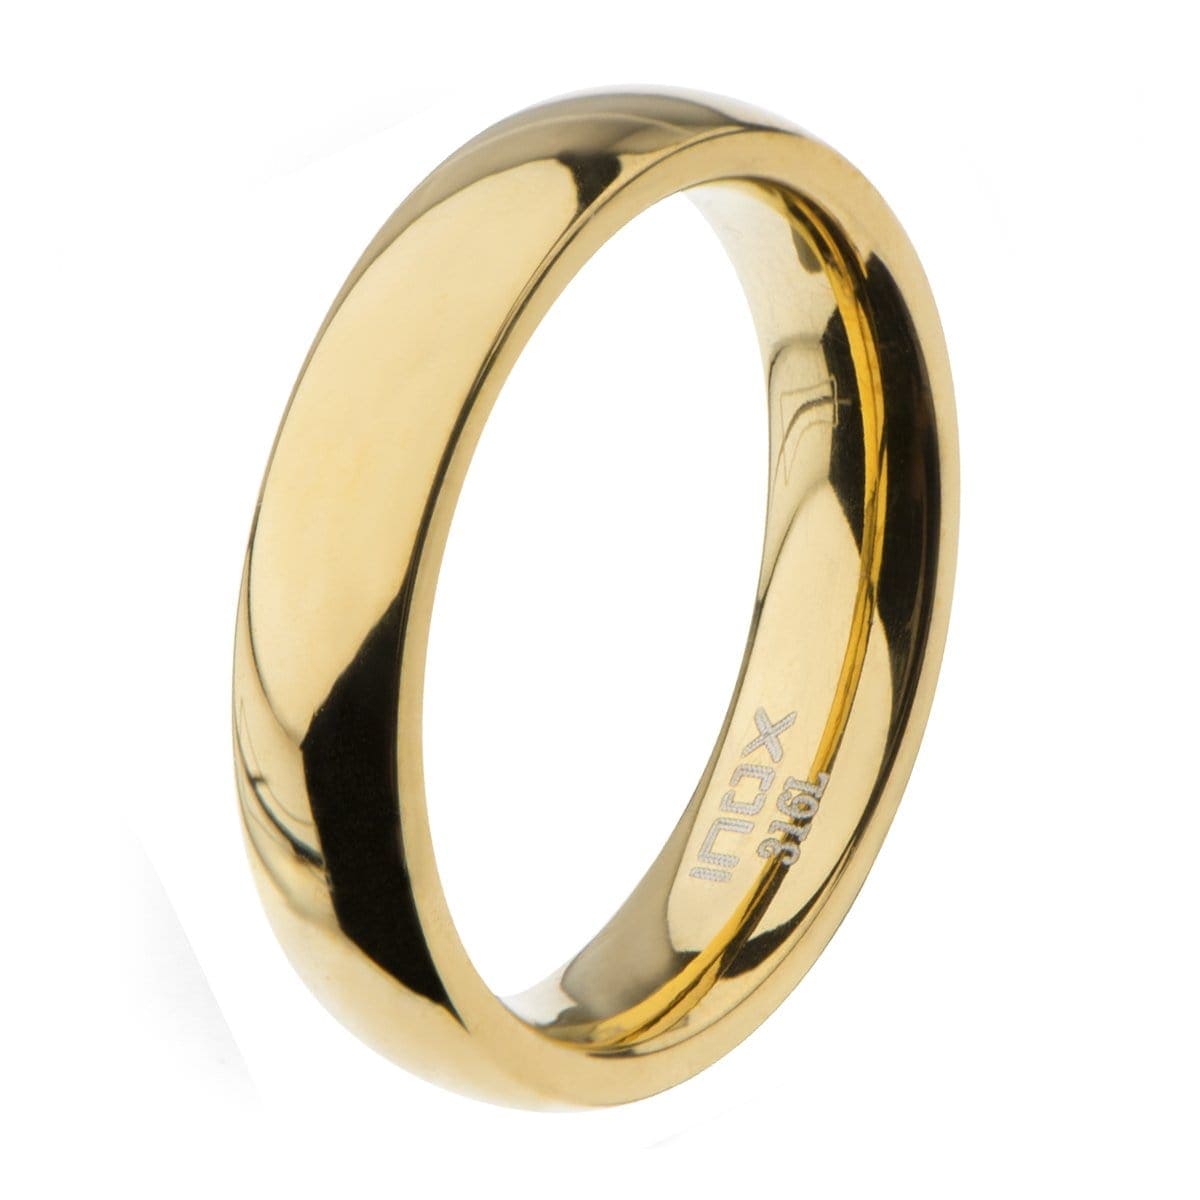 INOX JEWELRY Rings Golden Tone Stainless Steel Polished 4mm Band